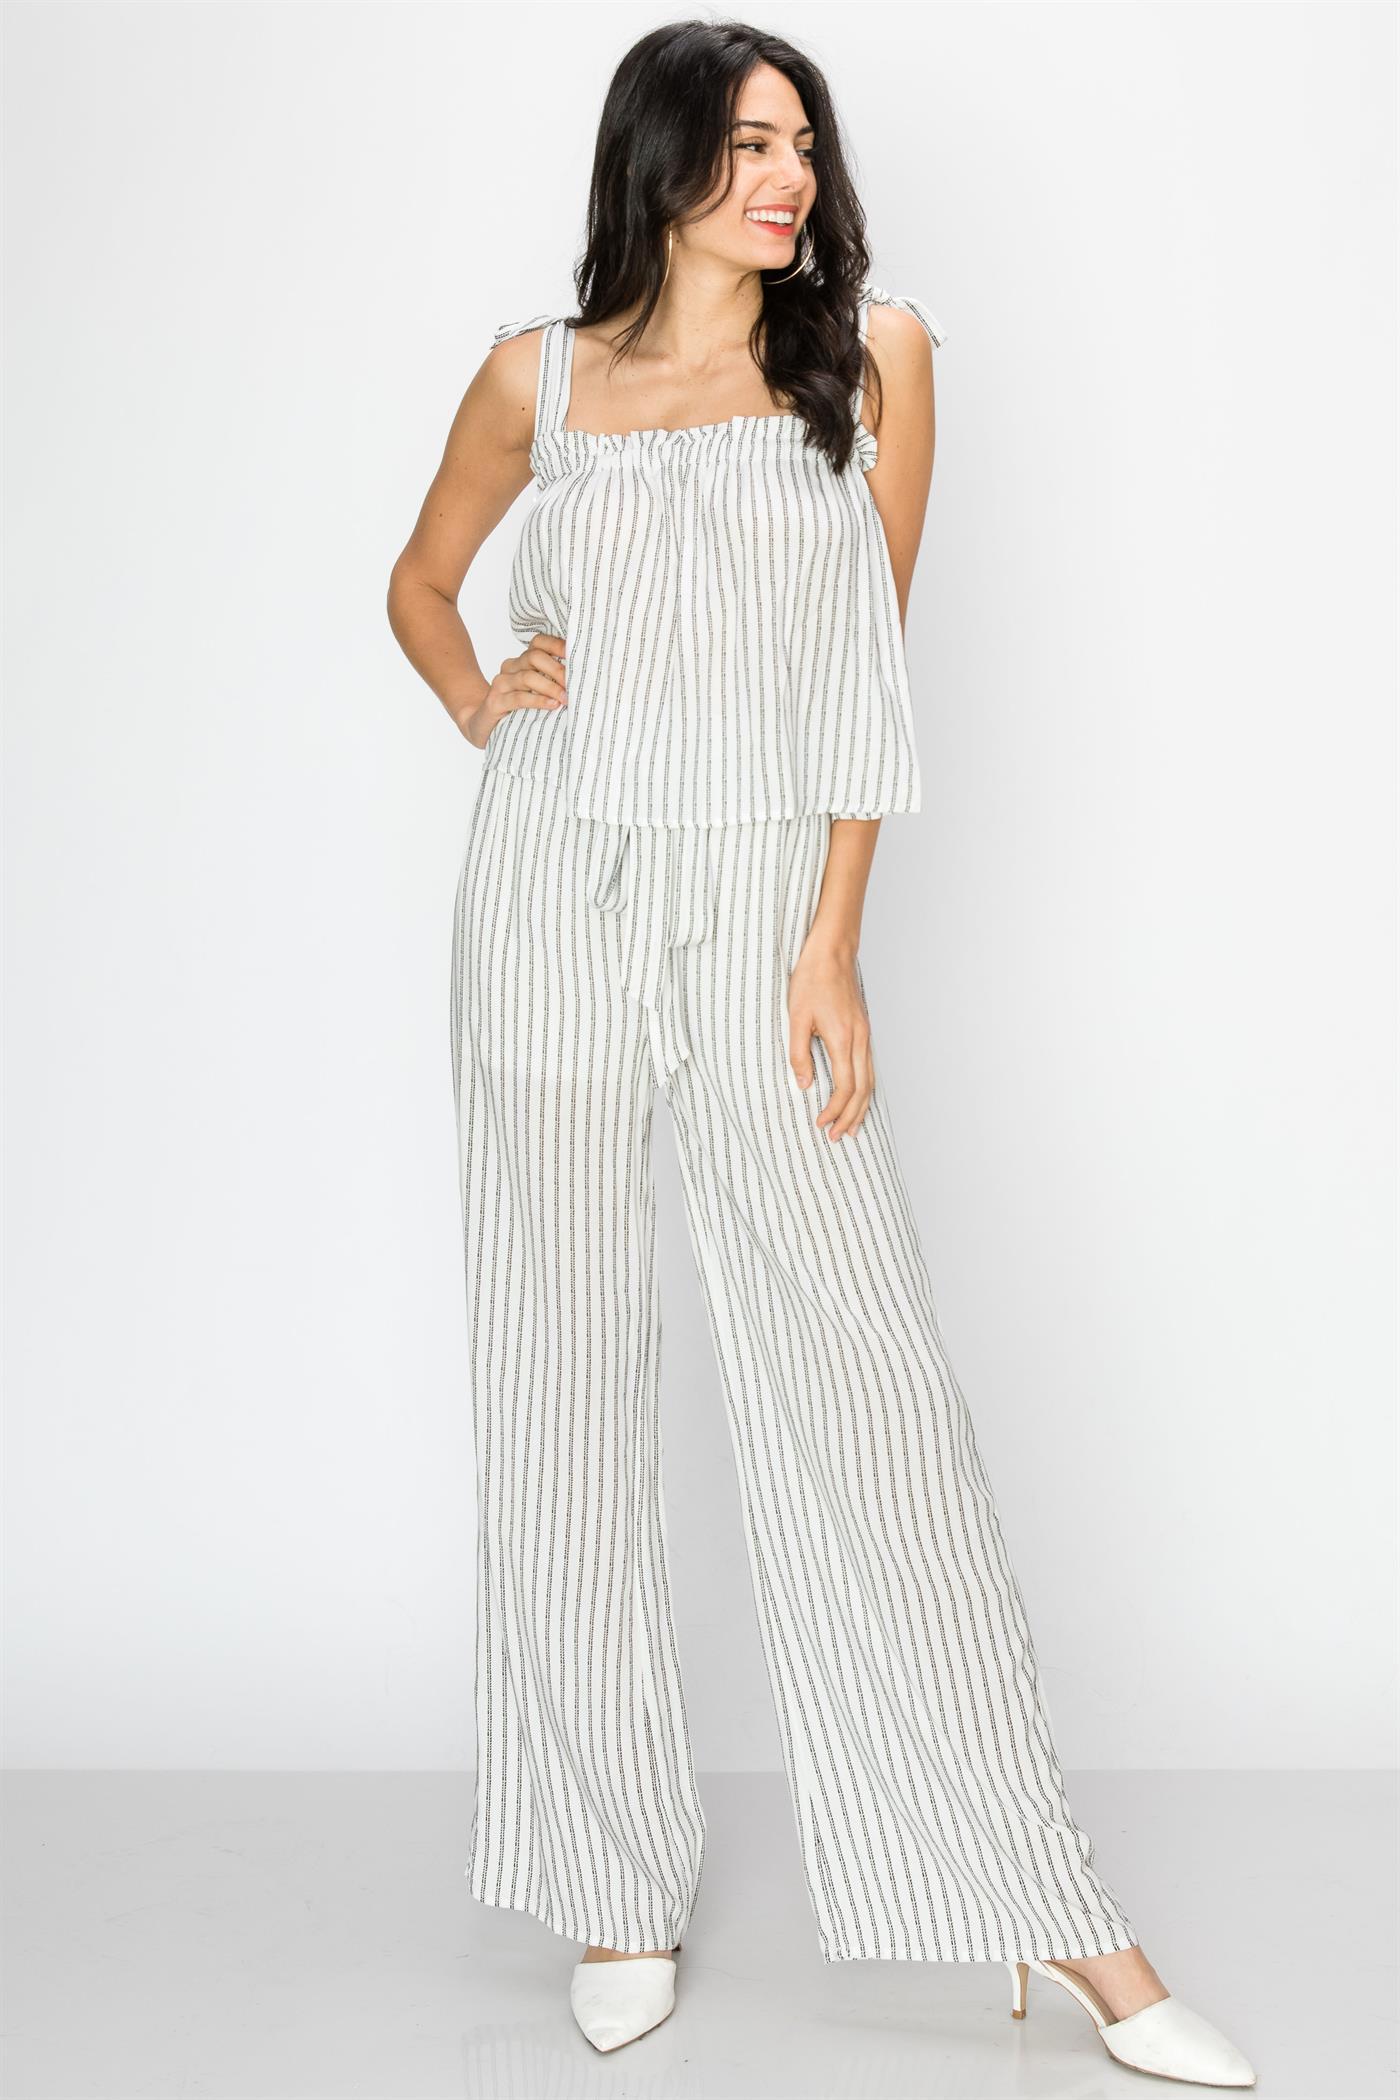 Mlh Tie Shoulder Top And Wide Leg Pant With Tie Waist 2 Piece Set - Off white / Large - MLH Online